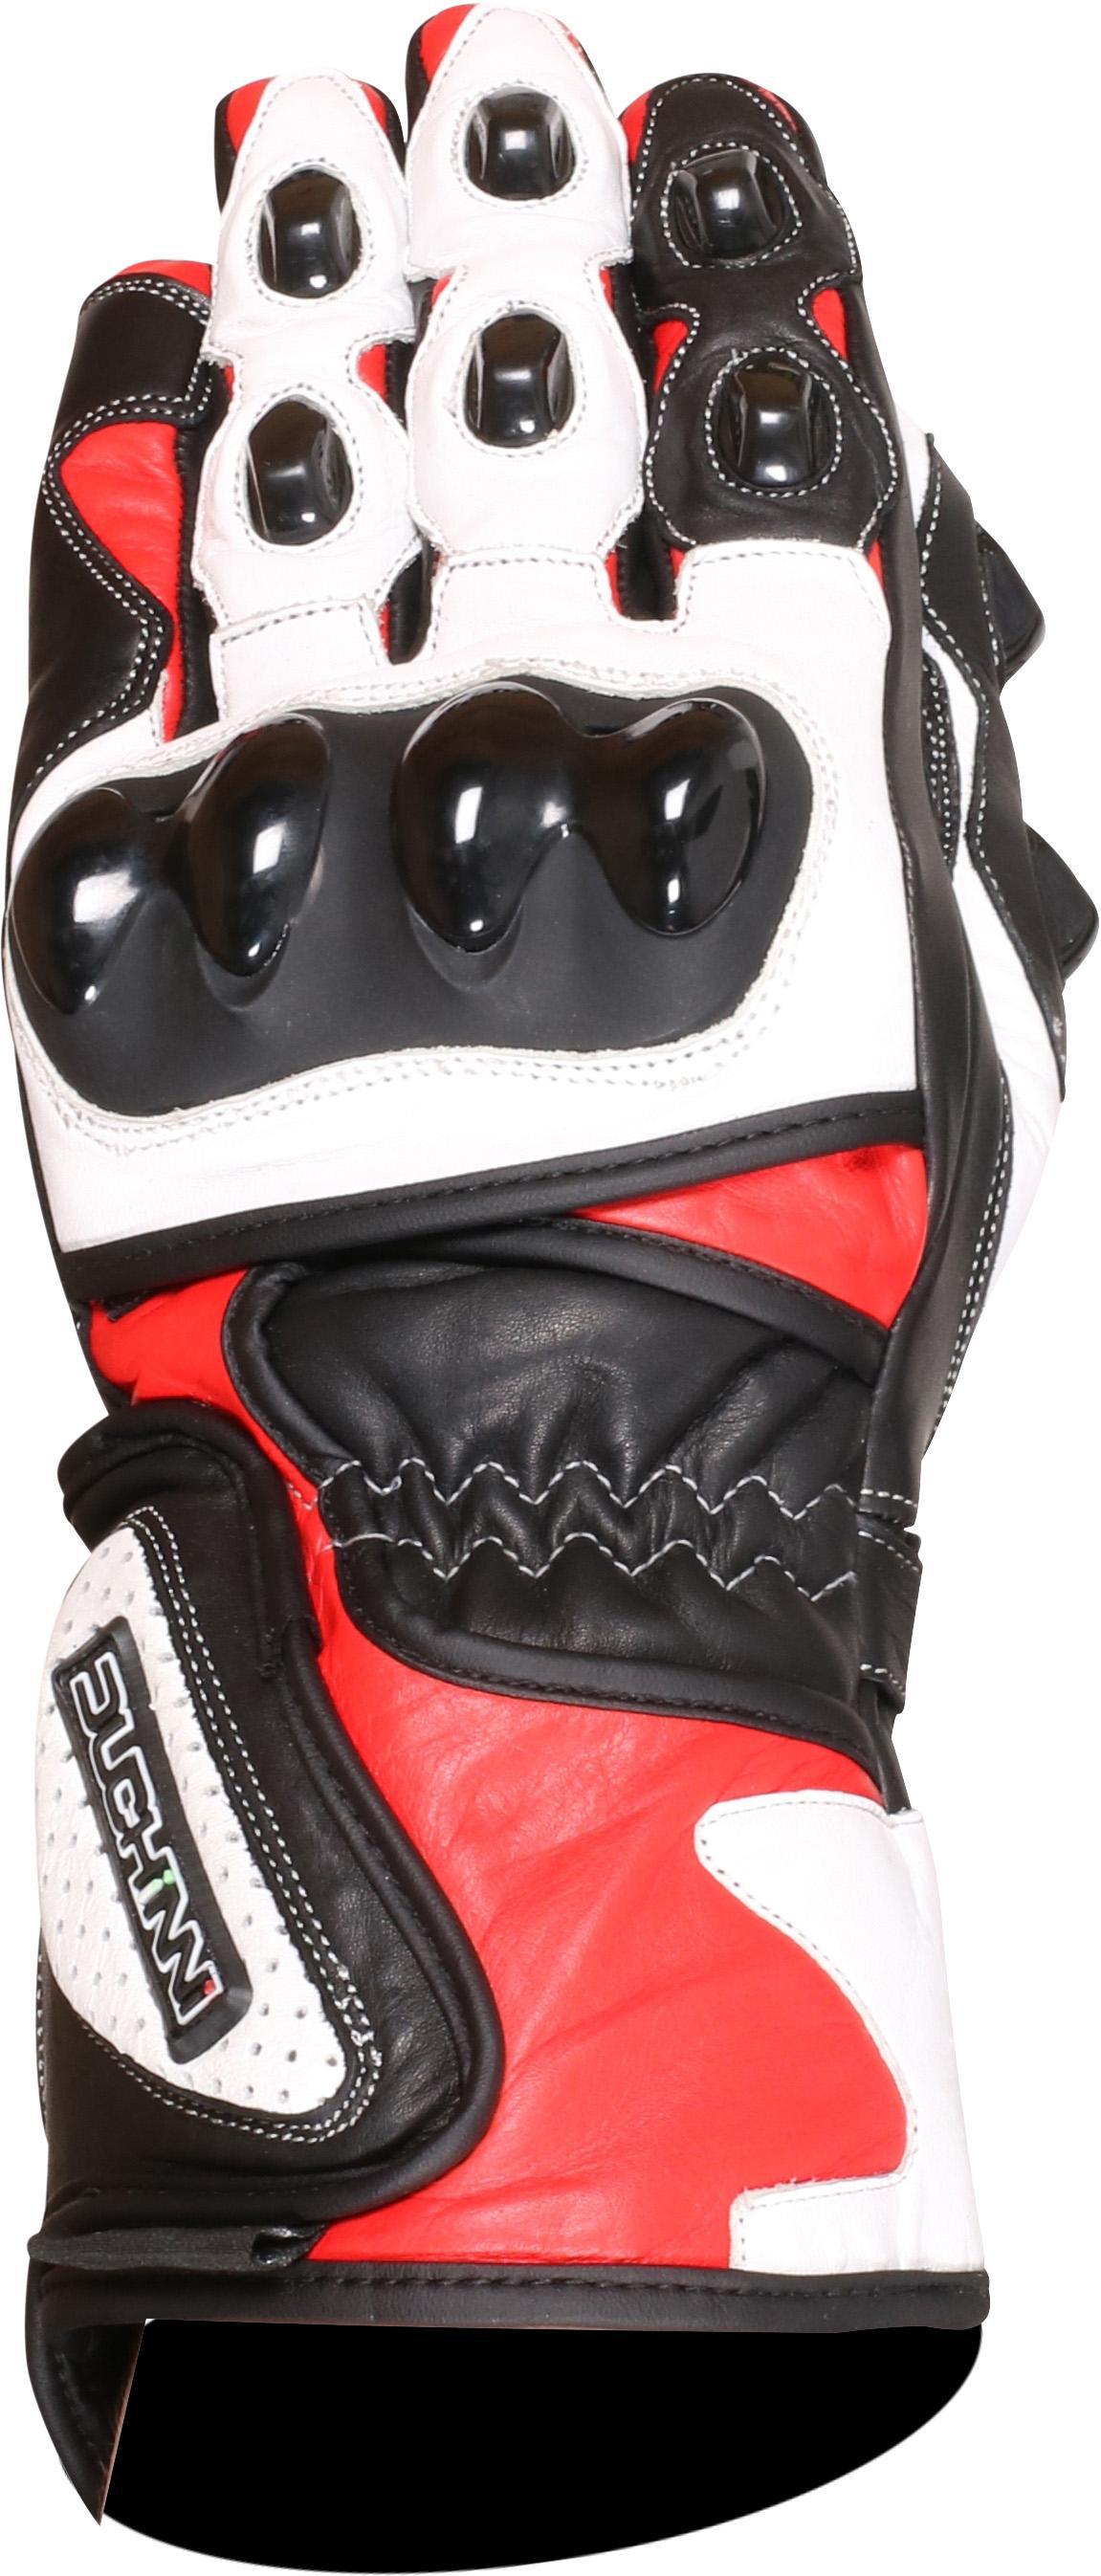 Duchinni Dr1 Motorcycle Gloves - Black And Red, L